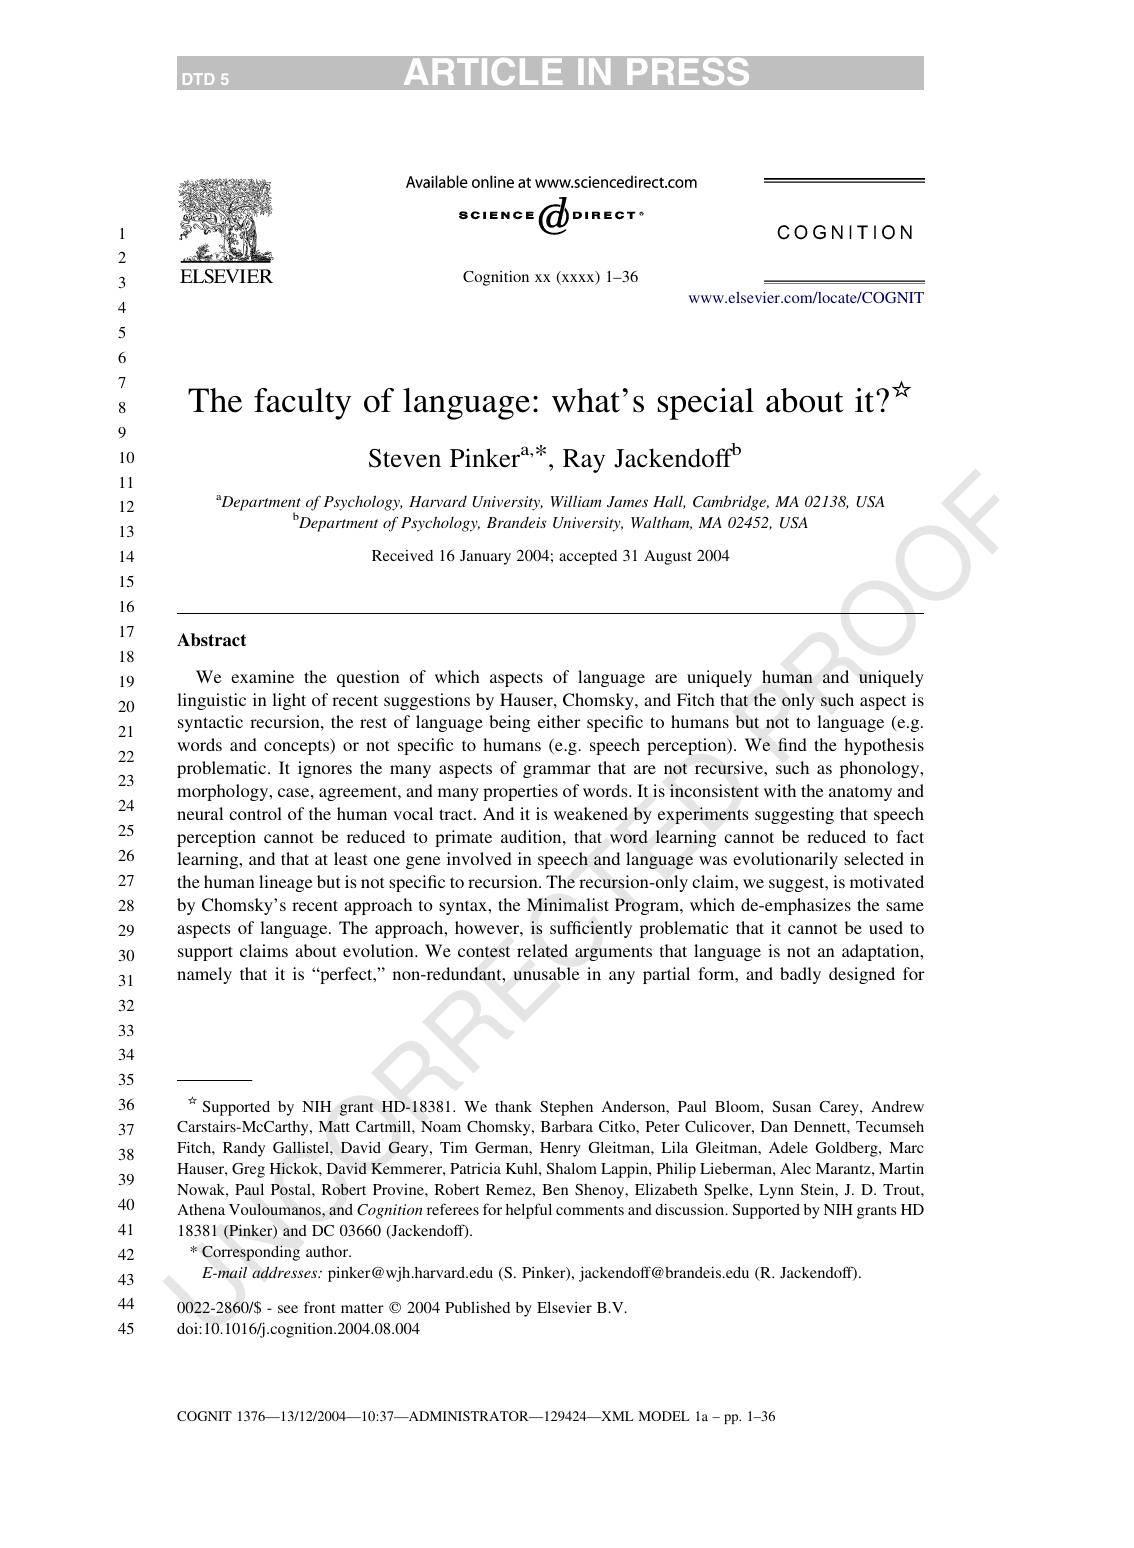 The faculty of language: what's special about it?